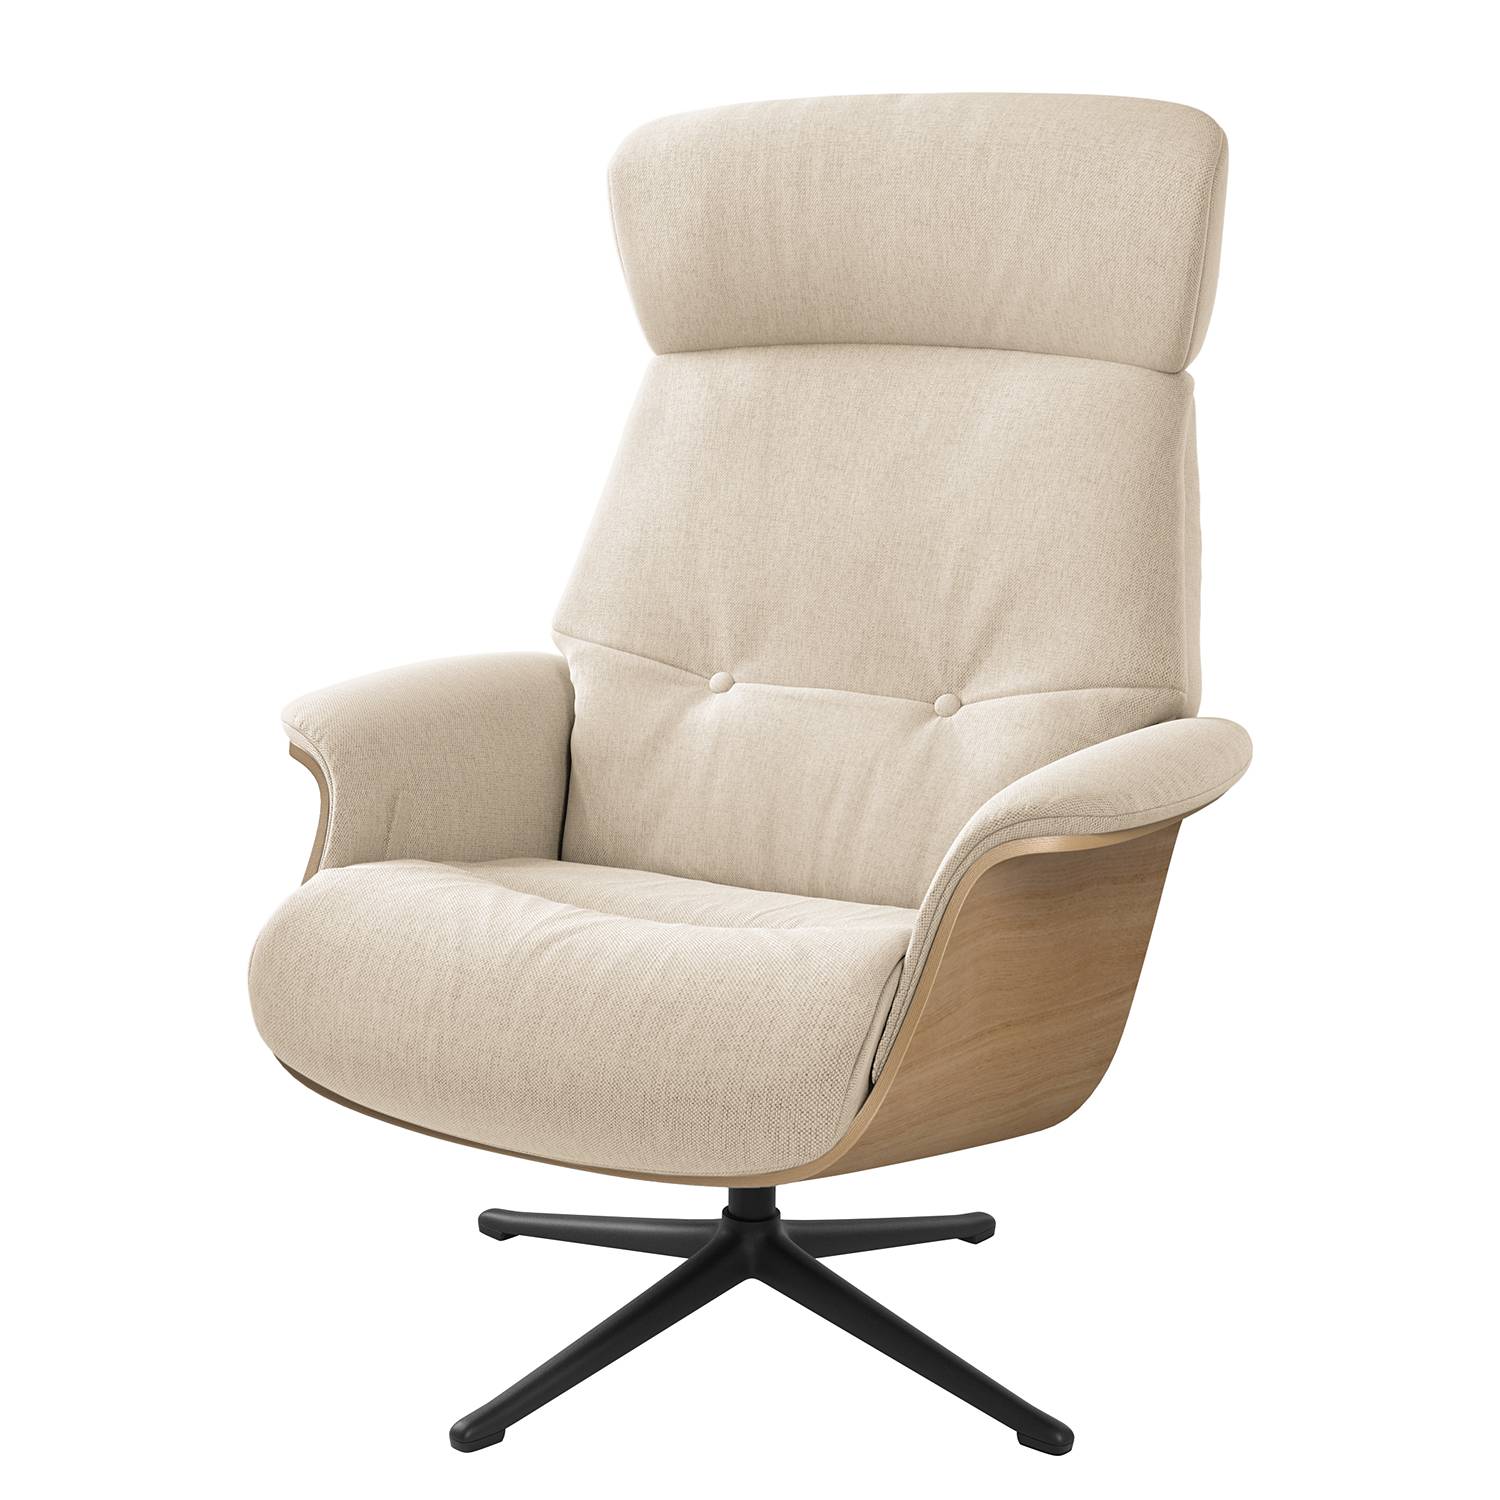 Image of Fauteuil relax Anderson IV 000000001000131275